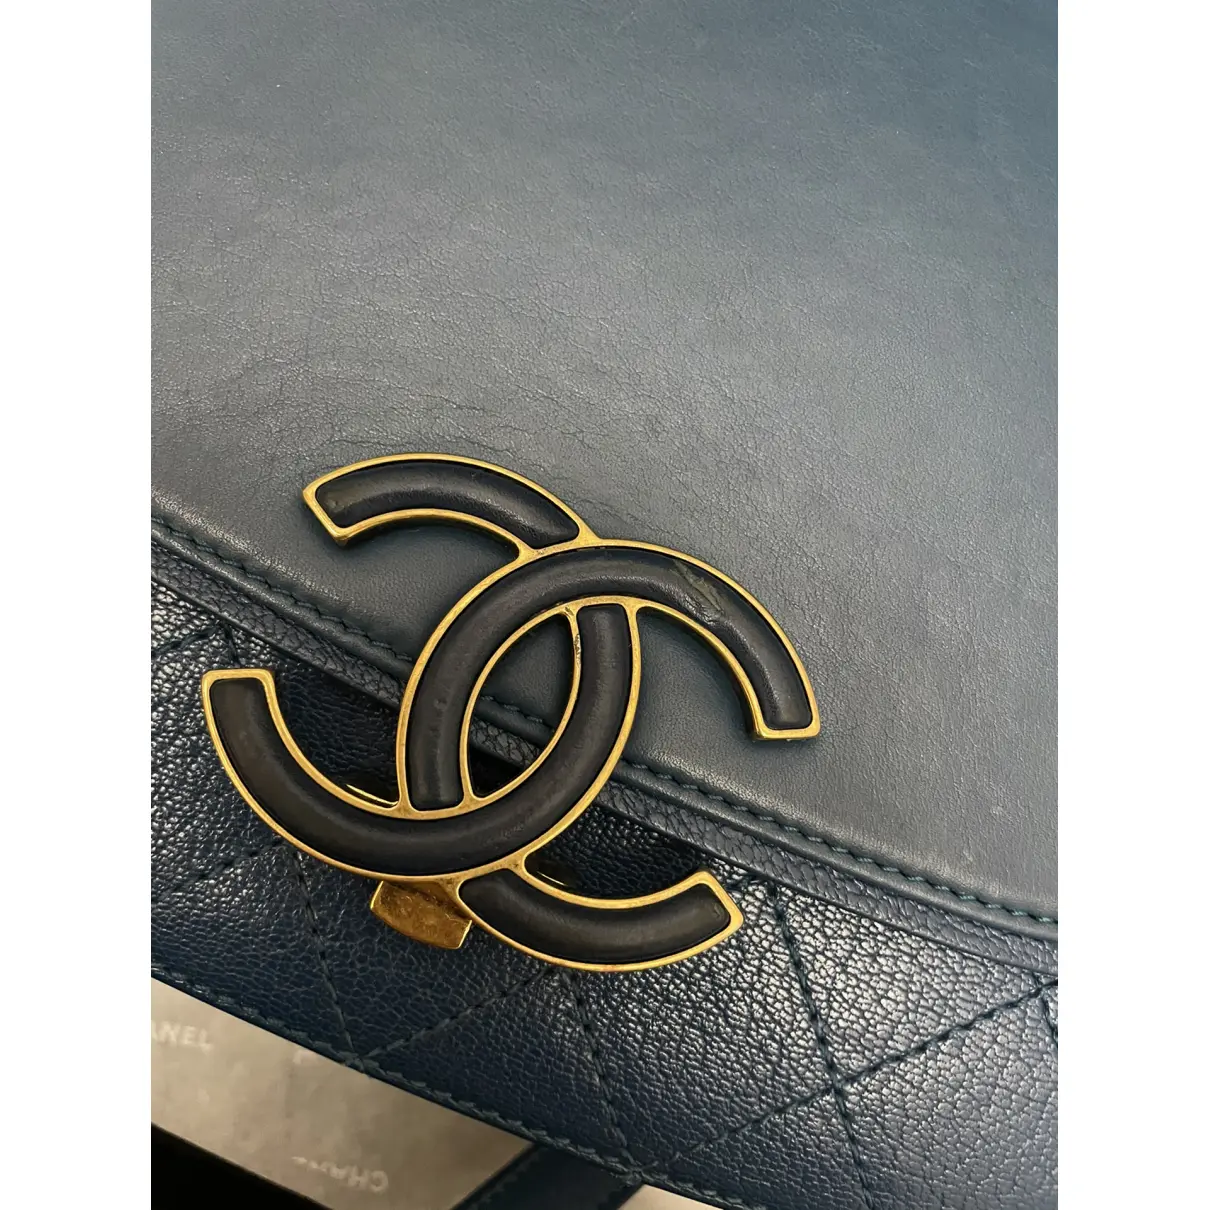 Buy Chanel Coco Curve leather crossbody bag online